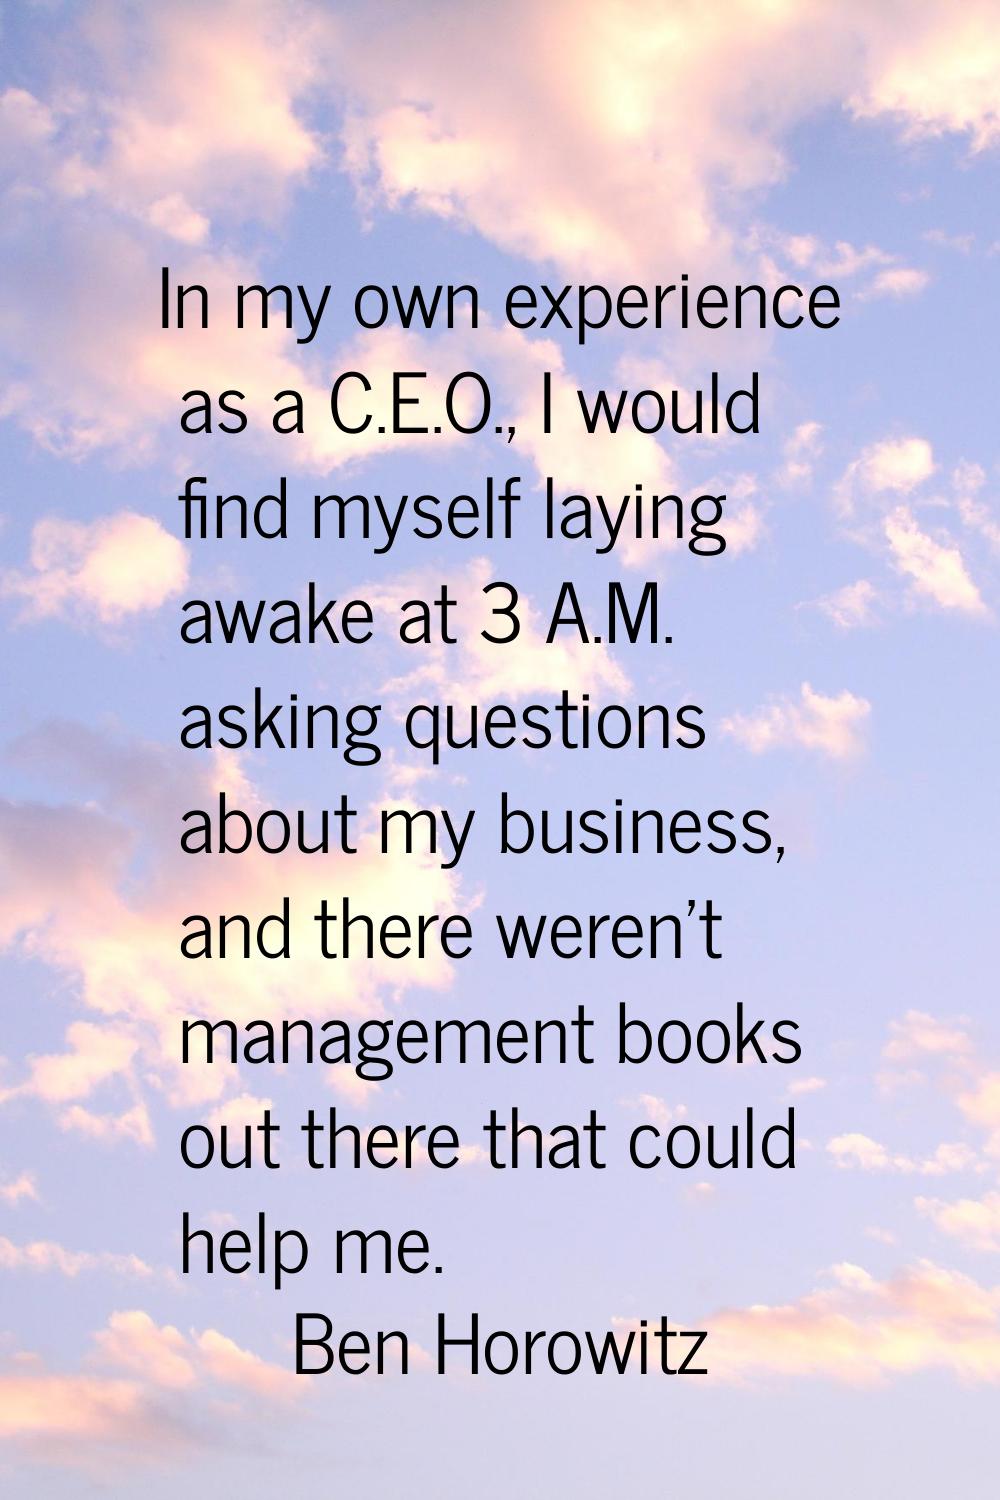 In my own experience as a C.E.O., I would find myself laying awake at 3 A.M. asking questions about